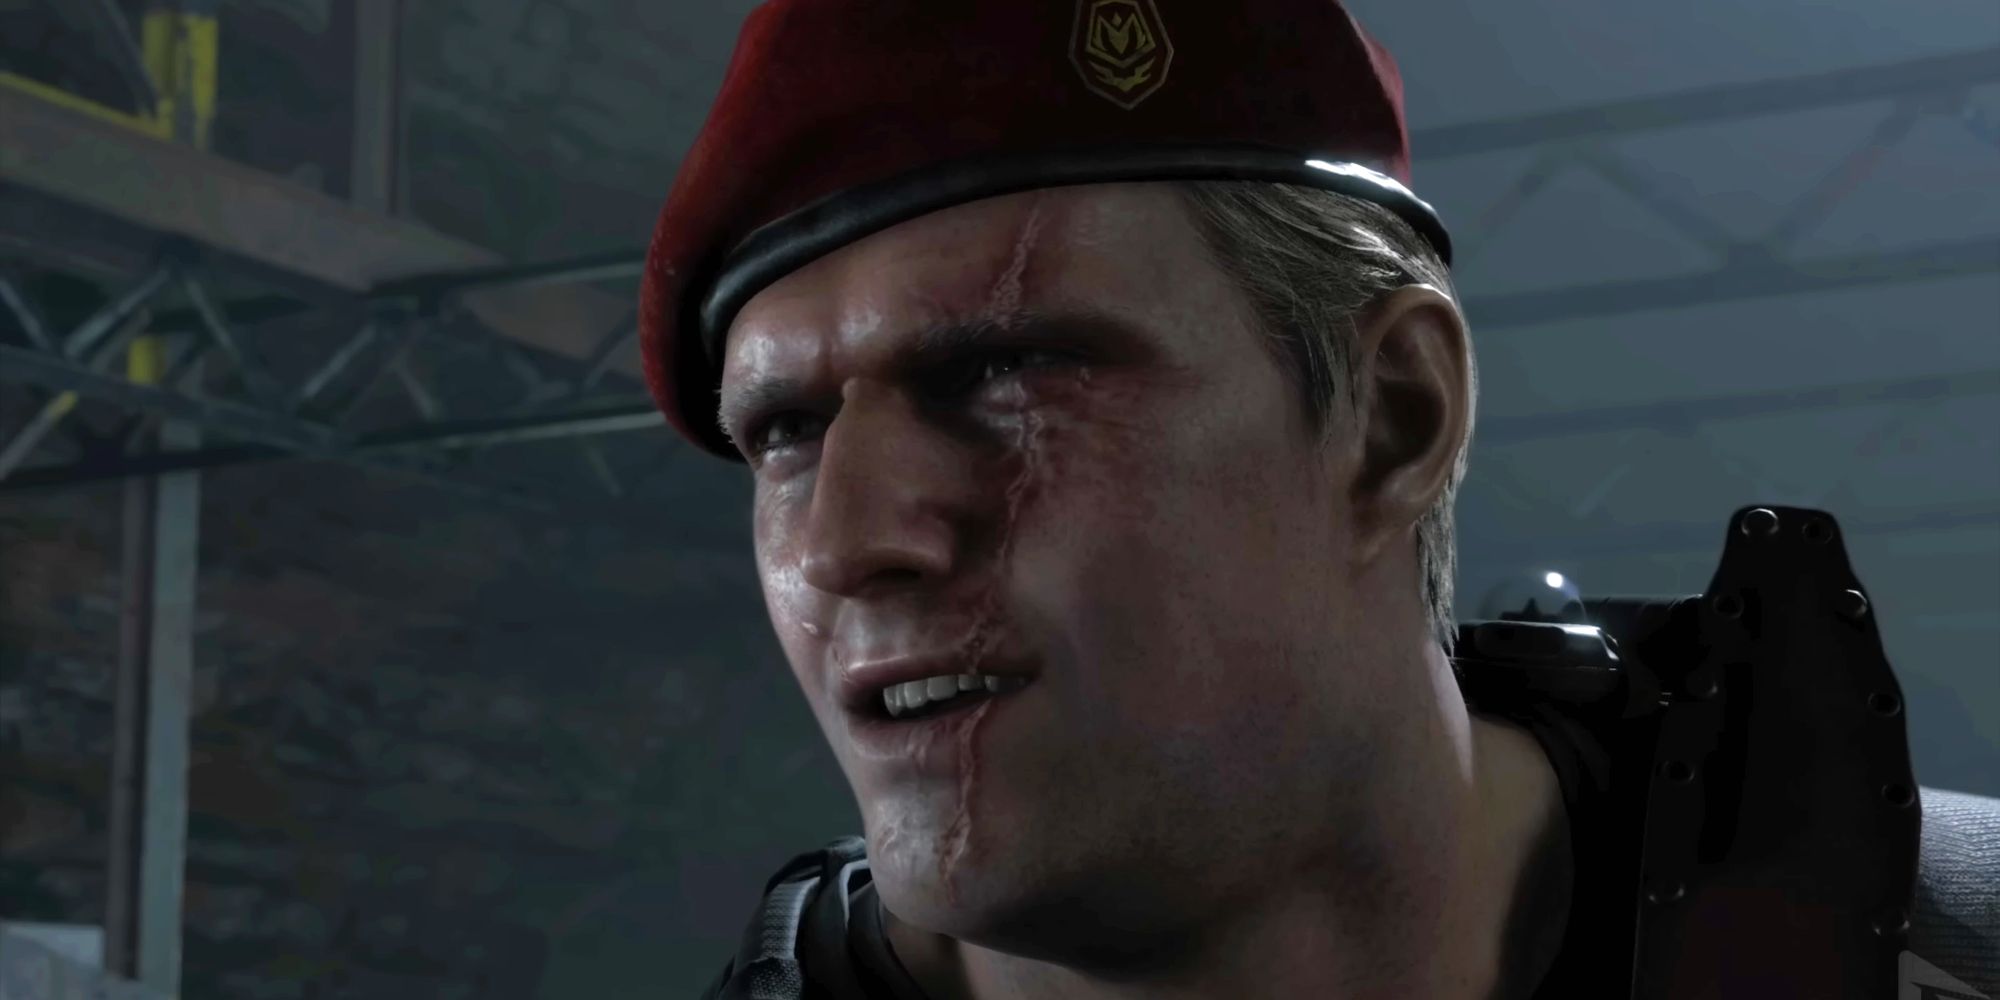 A close-up of Krauser in Resident Evil 4's remake, with a grapevine scar over one eye and wearing a red beret.